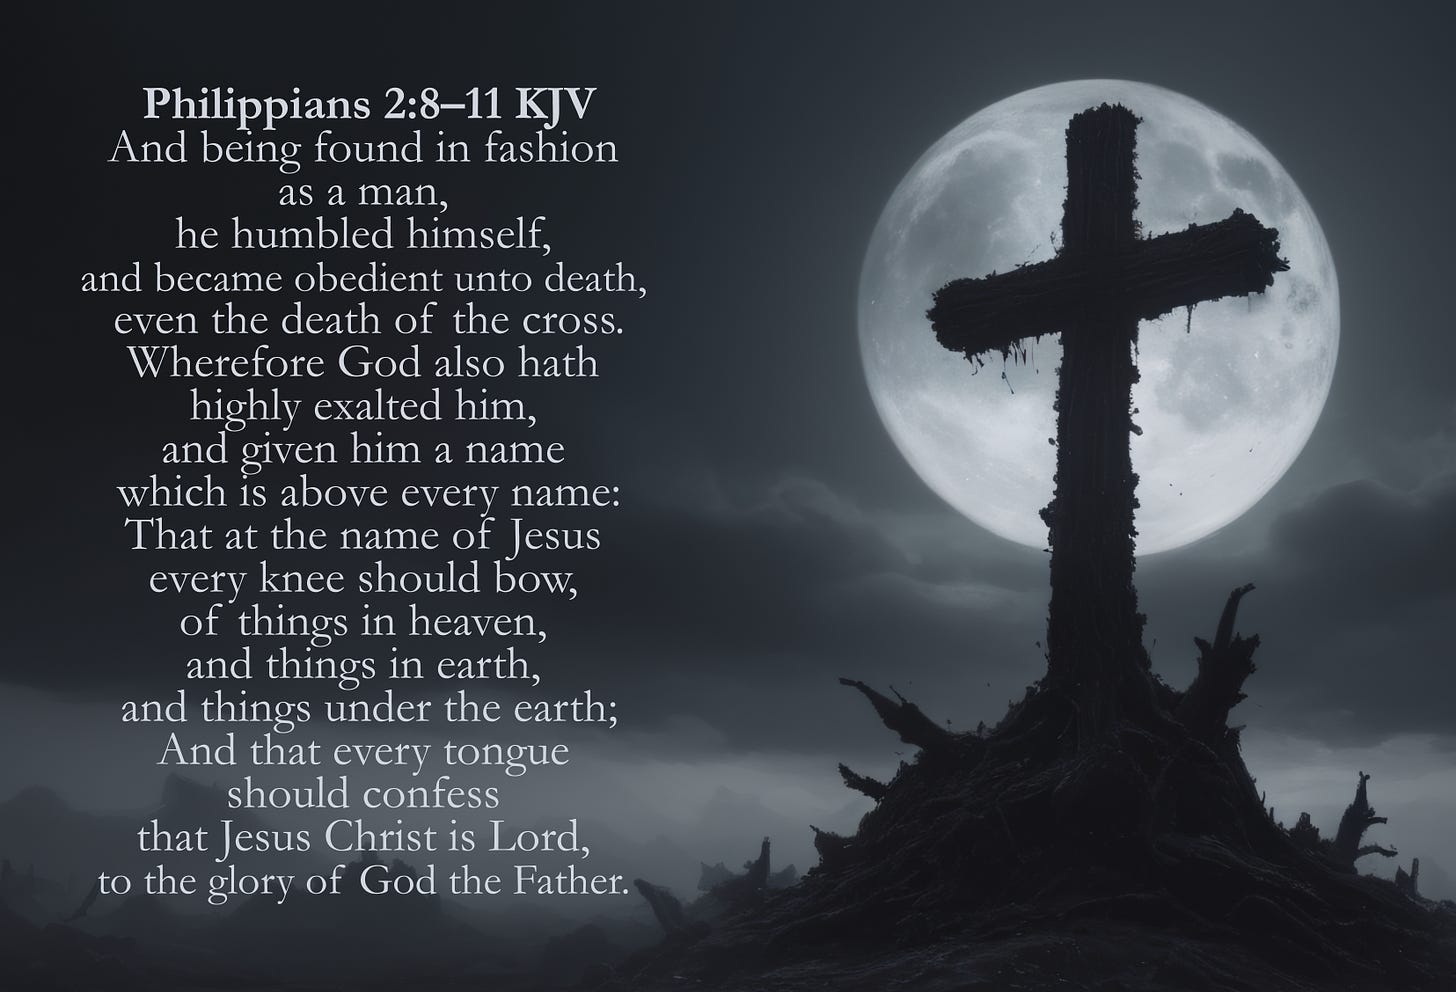 Deathly Cross KJV Card - Philippians 2:8–11 KJV - And being found in fashion as a man, he humbled himself, and became obedient unto death, even the death of the cross. Wherefore God also hath highly exalted him, and given him a name which is above every name: That at the name of Jesus every knee should bow, of things in heaven, and things in earth, and things under the earth; And that every tongue should confess that Jesus Christ is Lord, to the glory of God the Father.  